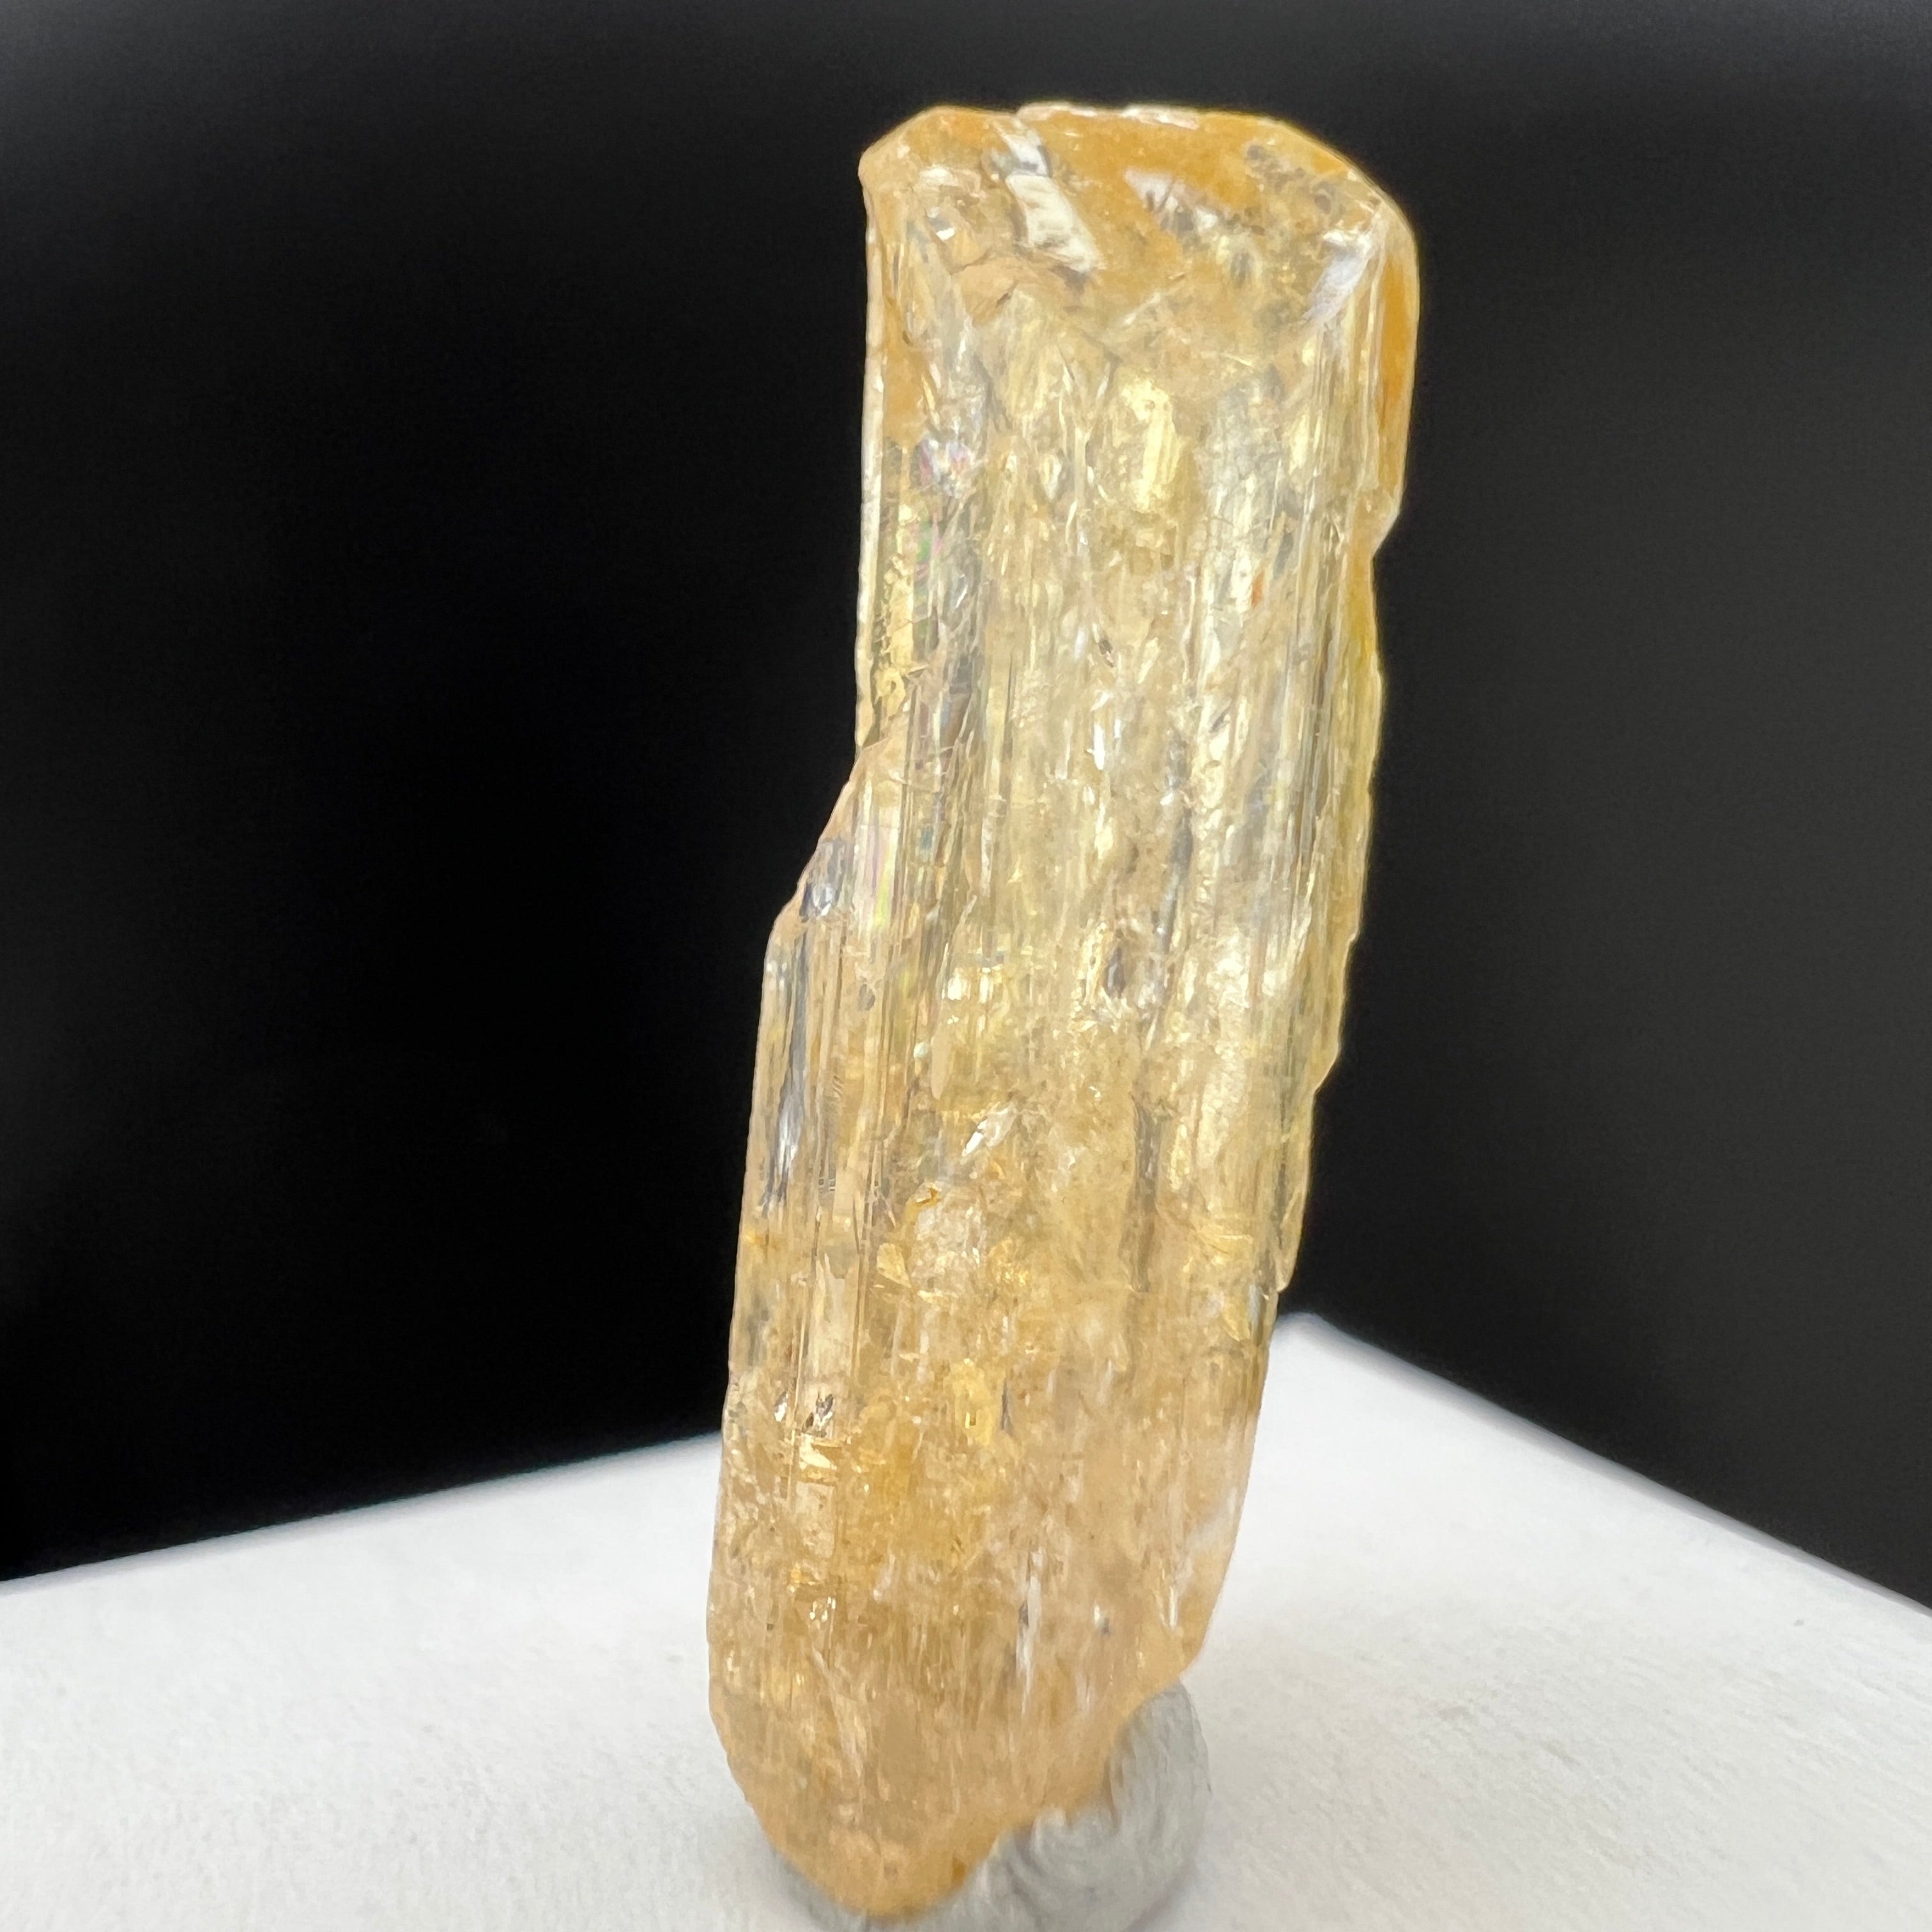 Imperial Topaz Natural Full Terminated Crystal - 047